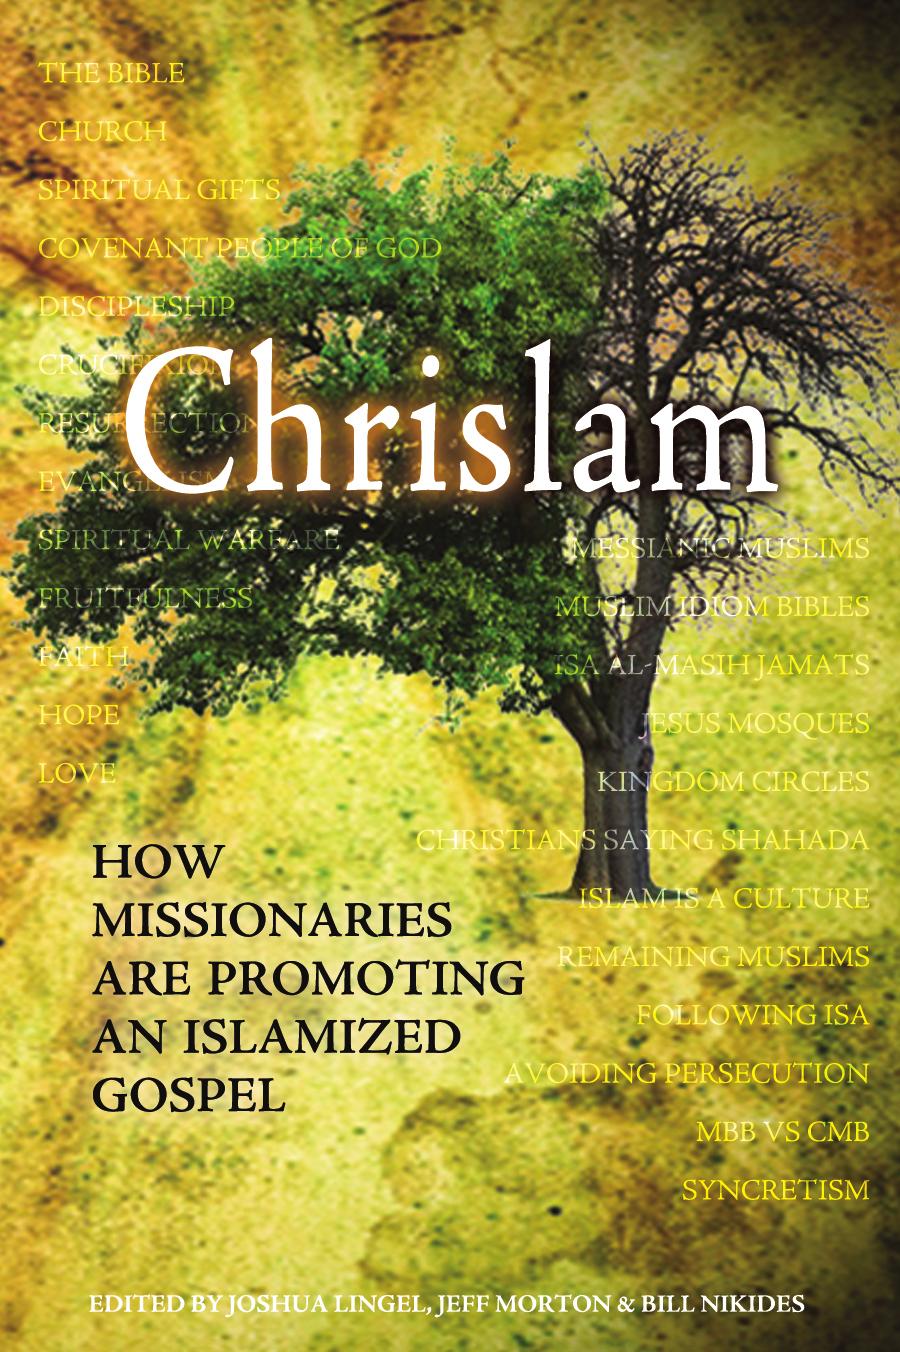 is. In Apocalypse Later, former Muslim Abdu Murray urges Christians to change their focus from eschatology to the Gospel of Jesus Christ and equips Christians to demonstrate to non-believers that the